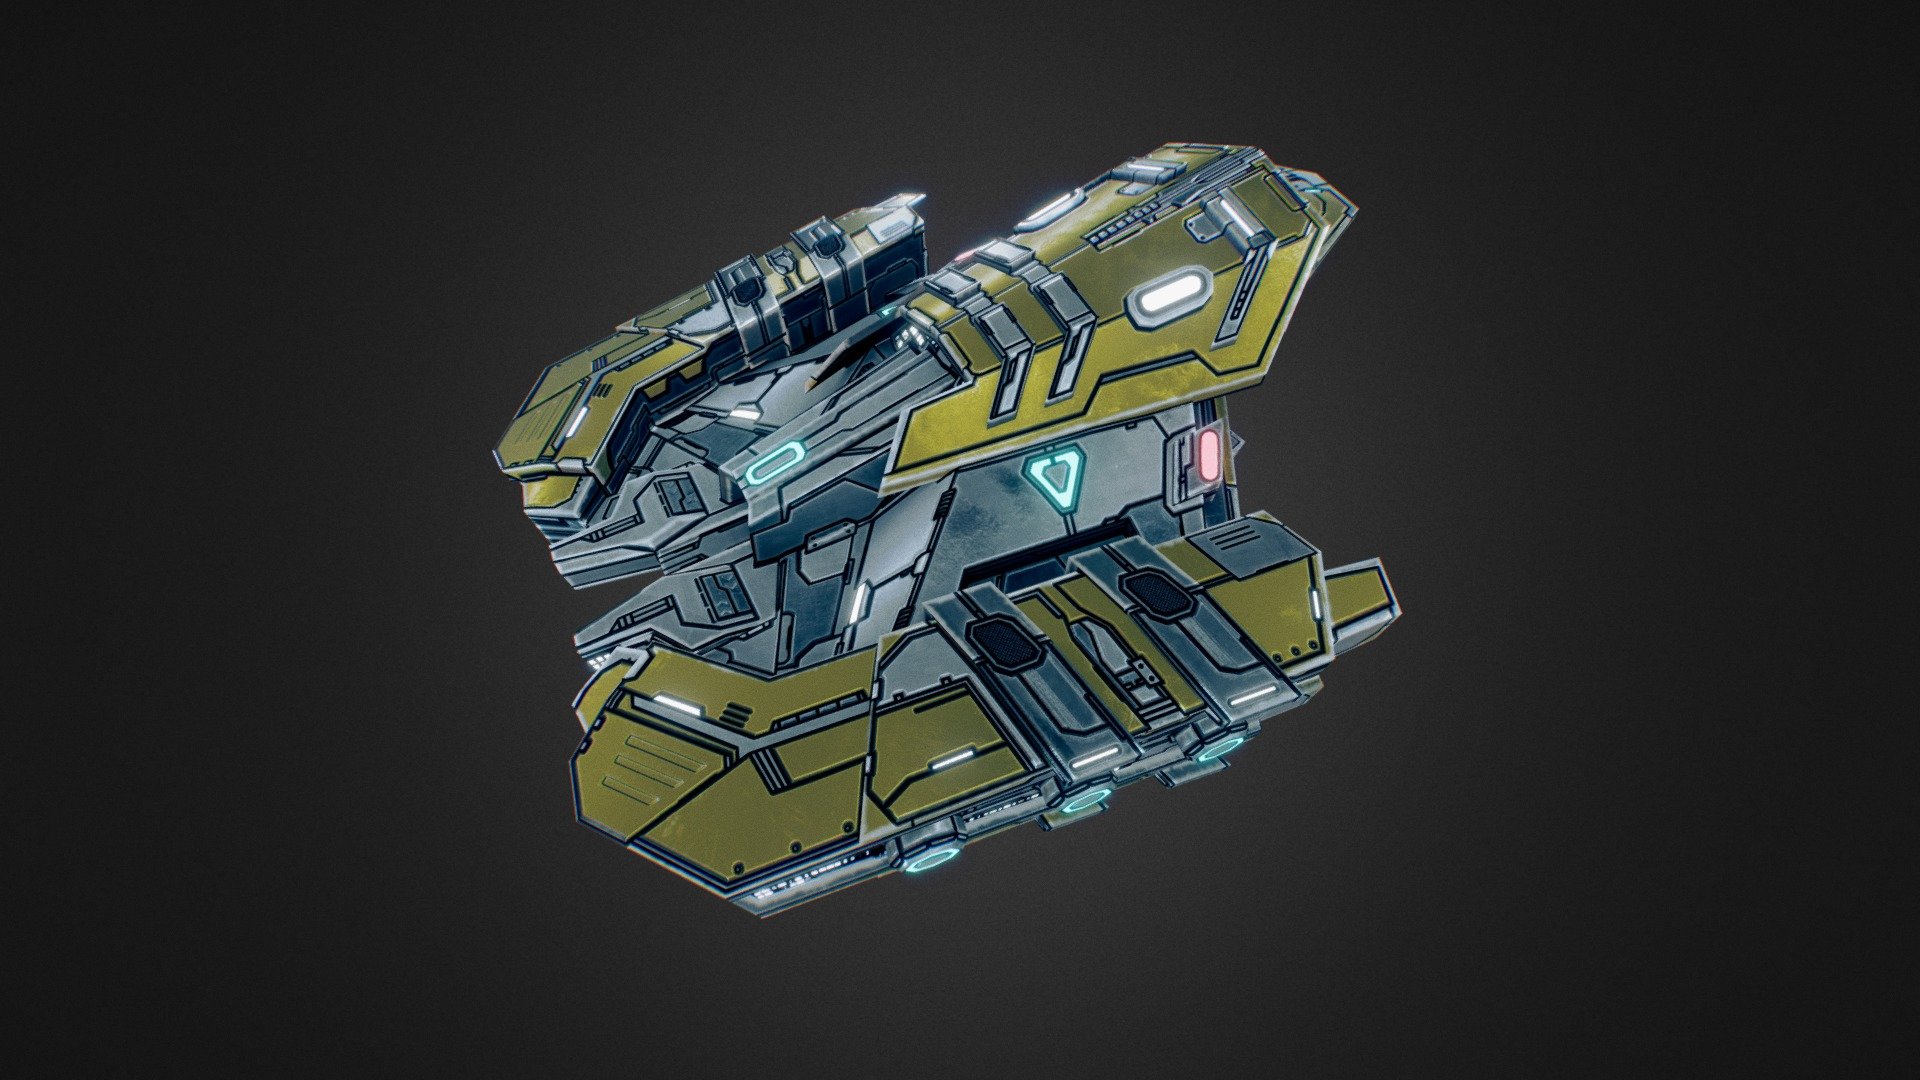 In-game model of a small spaceship belonging to the Eclipse faction.
Learn more about the game at http://starfalltactics.com/ - Starfall Tactics — Orlov Eclipse frigate - 3D model by Snowforged Entertainment (@snowforged) 3d model